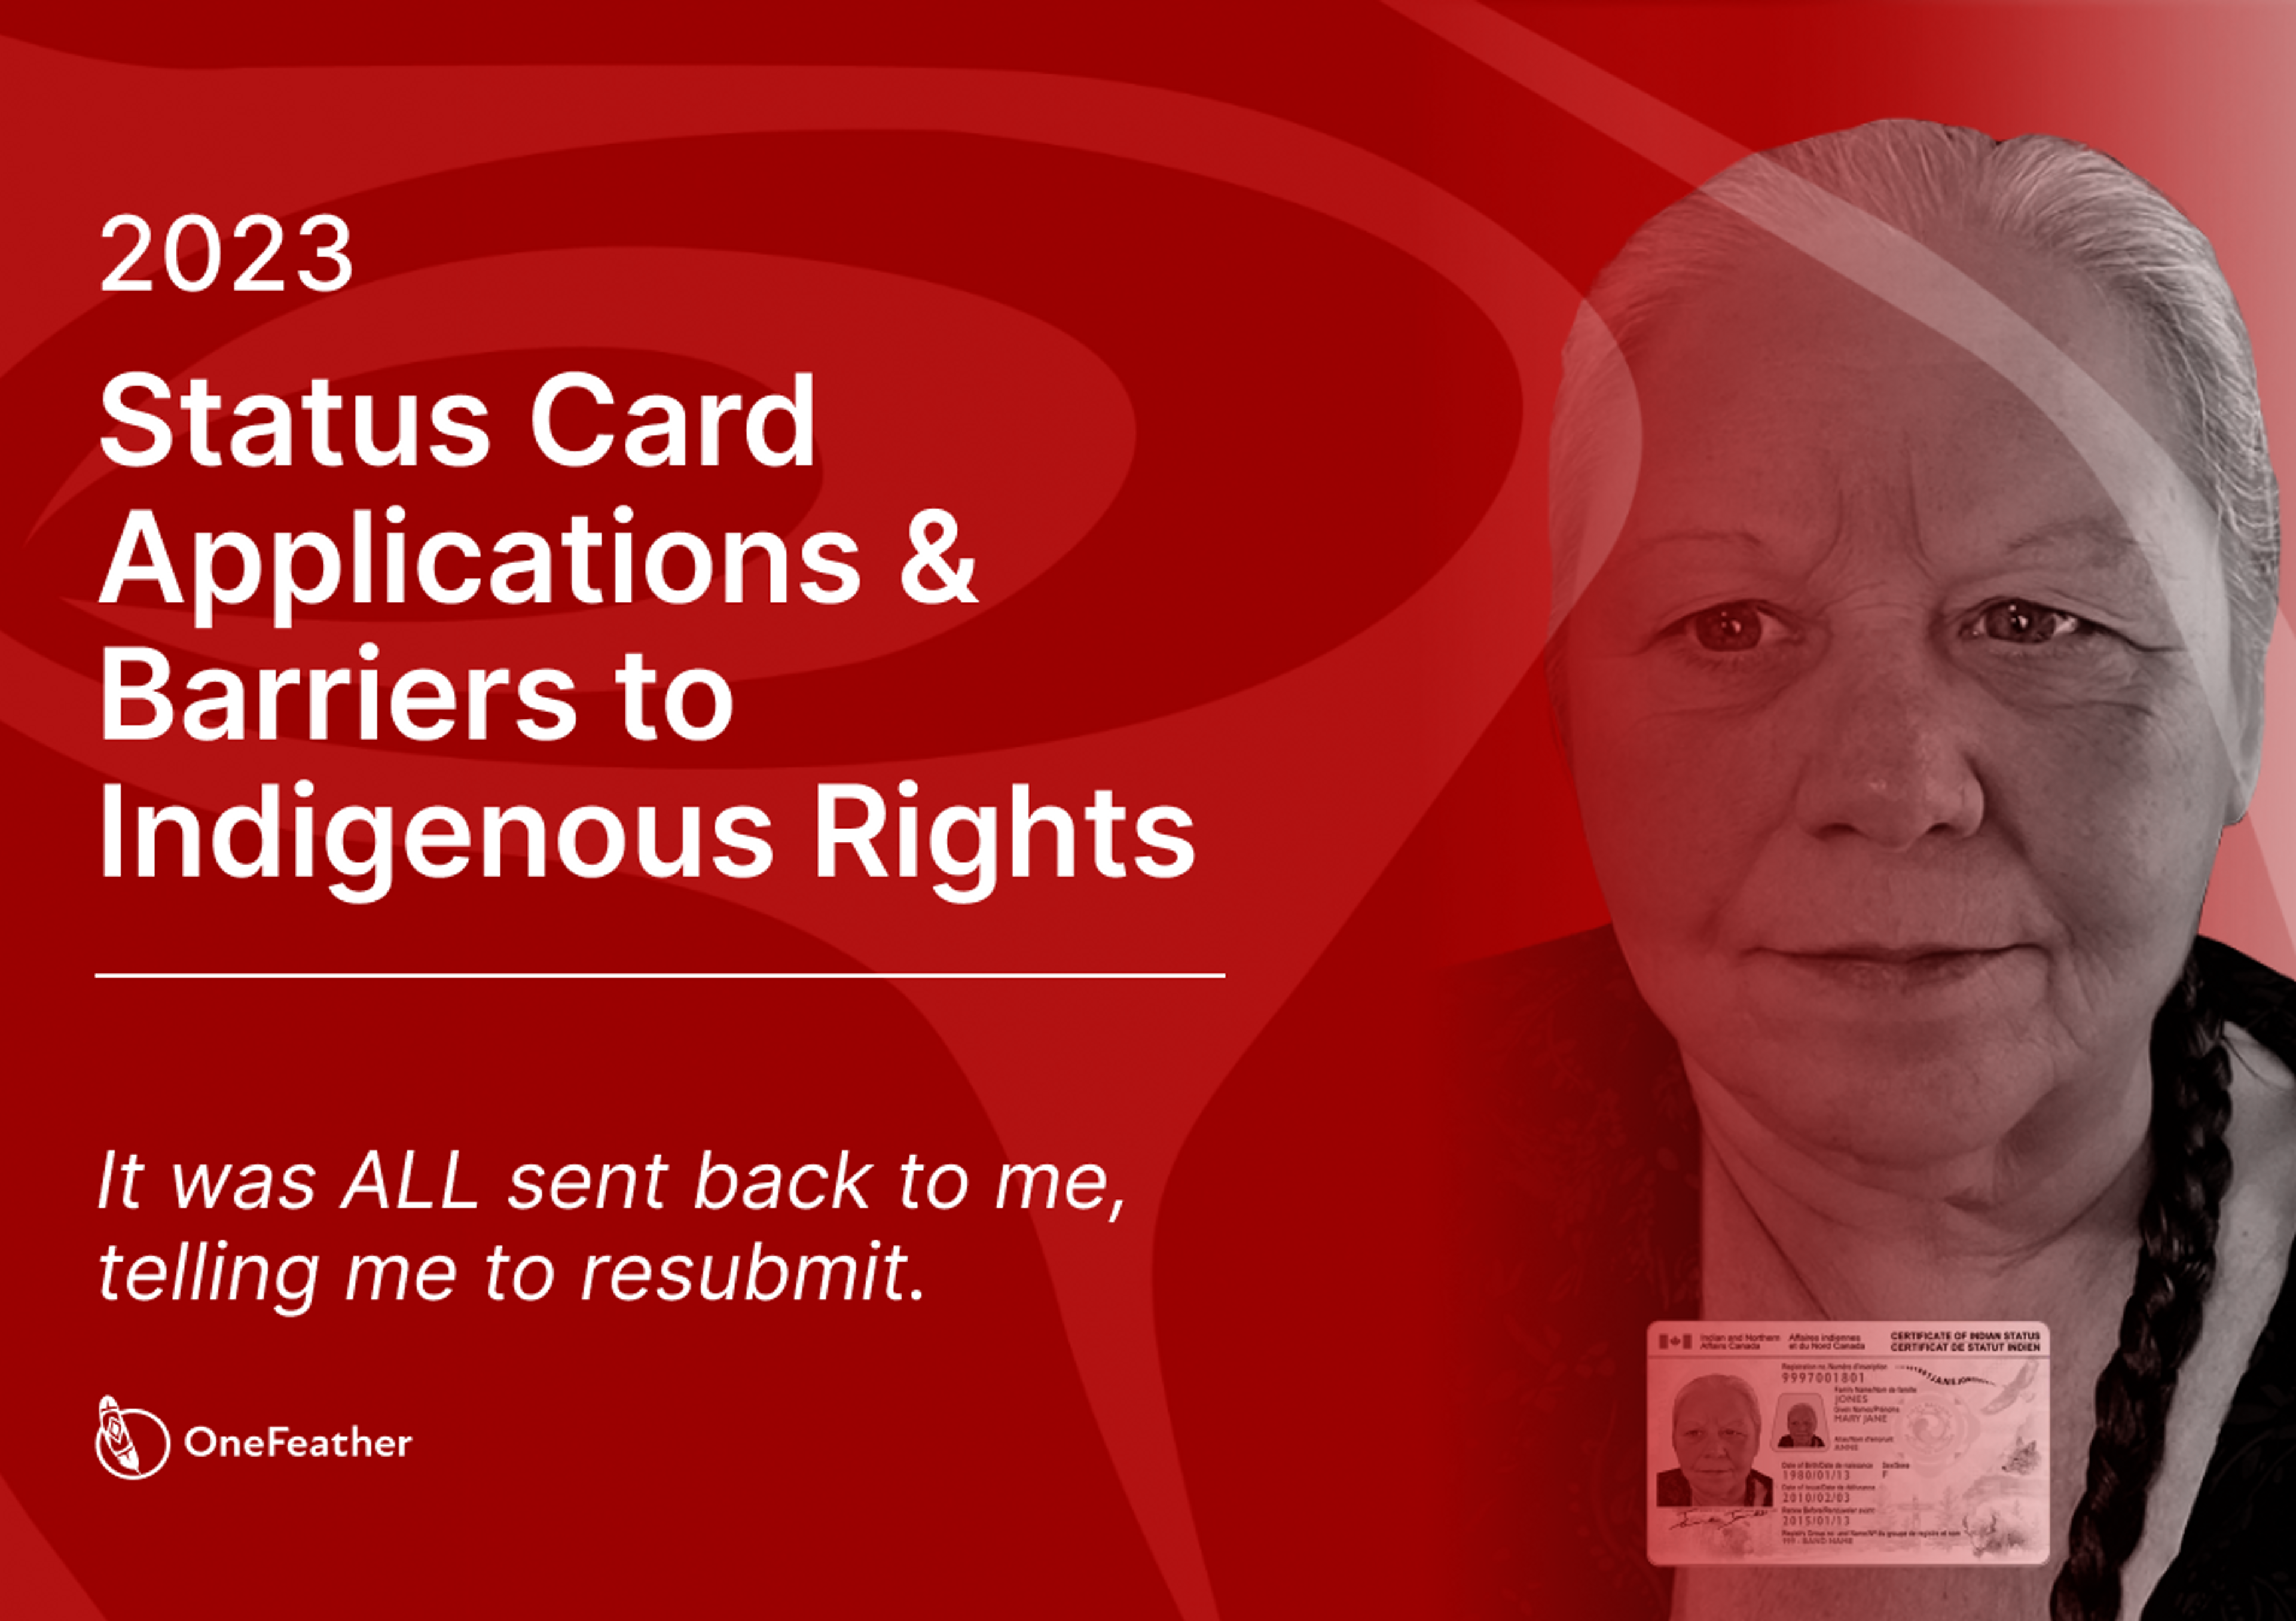 Cover Image for It was ALL sent back to me, telling me to resubmit: Status Card Applications & Barriers to Indigenous Rights